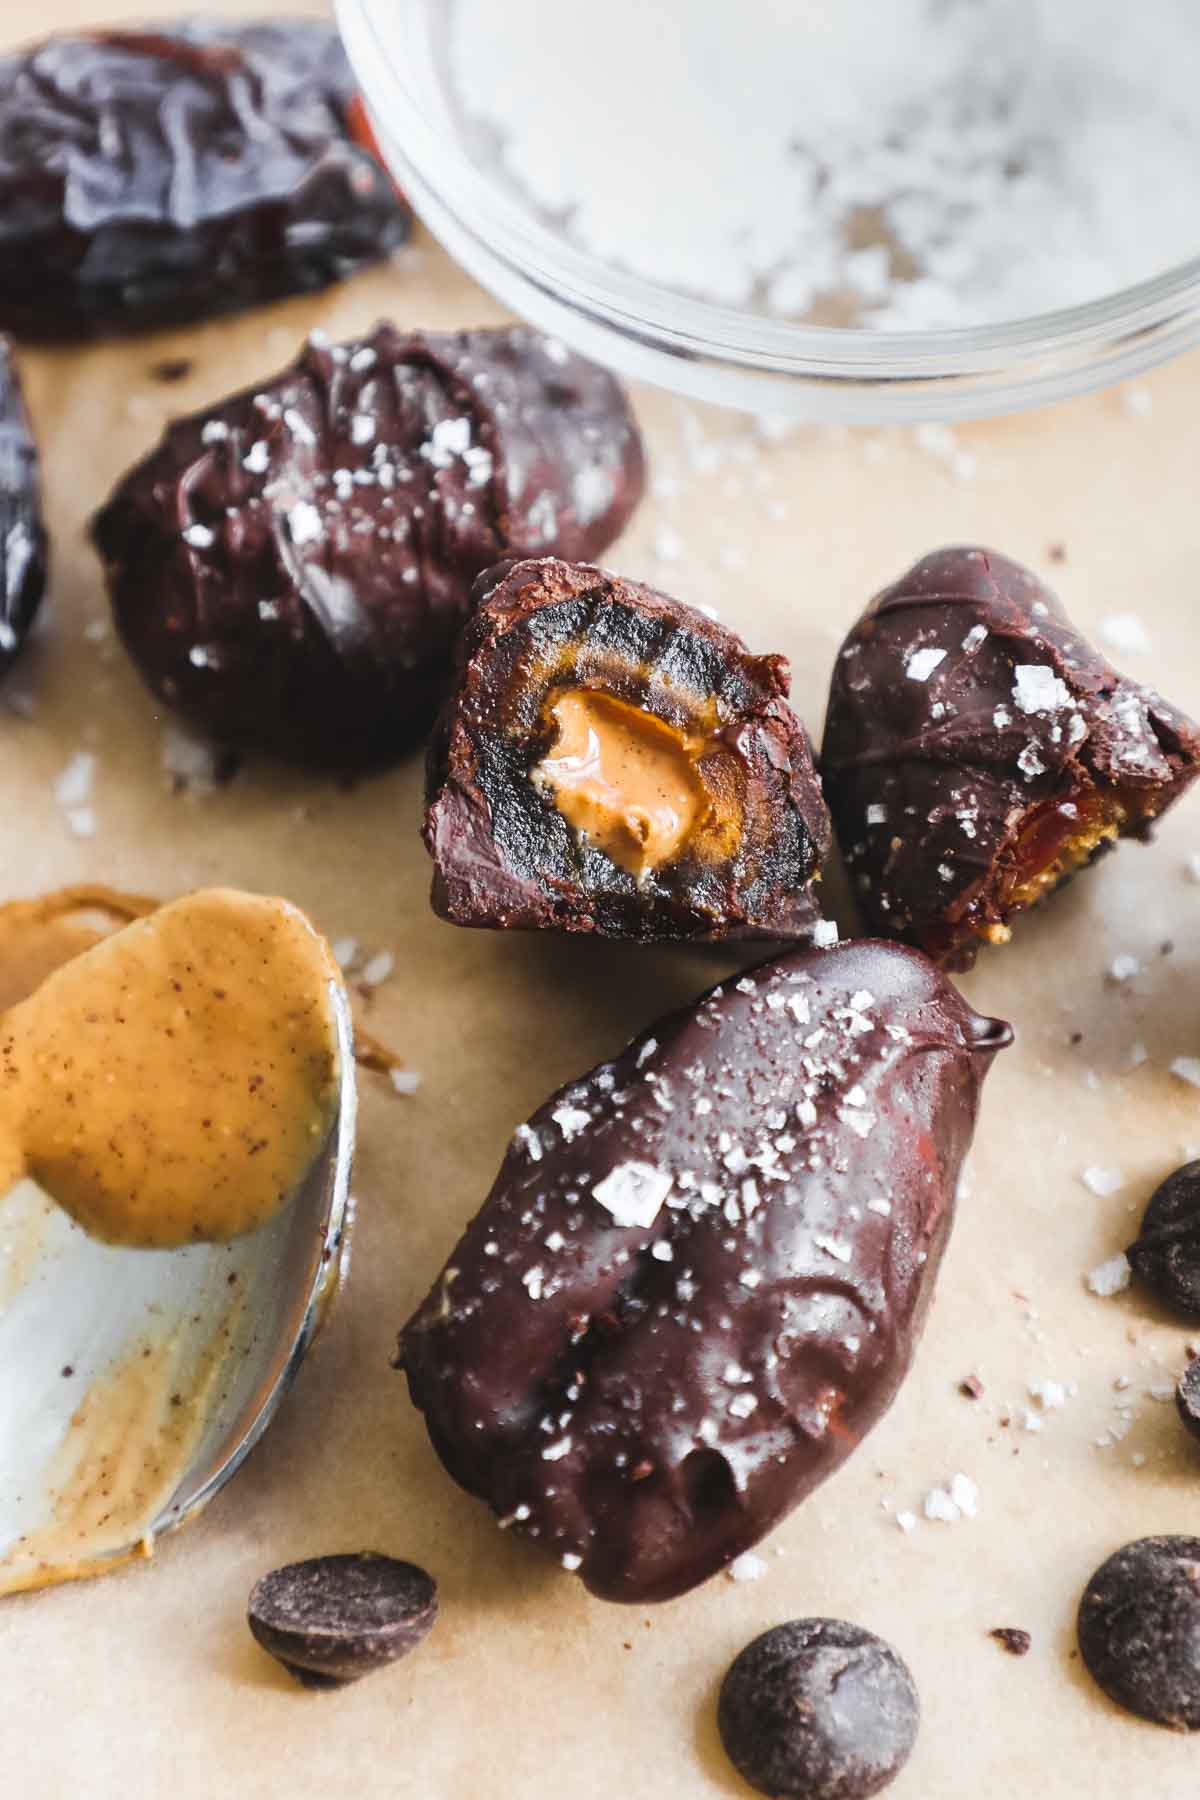 Dates stuffed with nut butter, covered in chocolate, and topped with flaky sea salt on parchment paper.